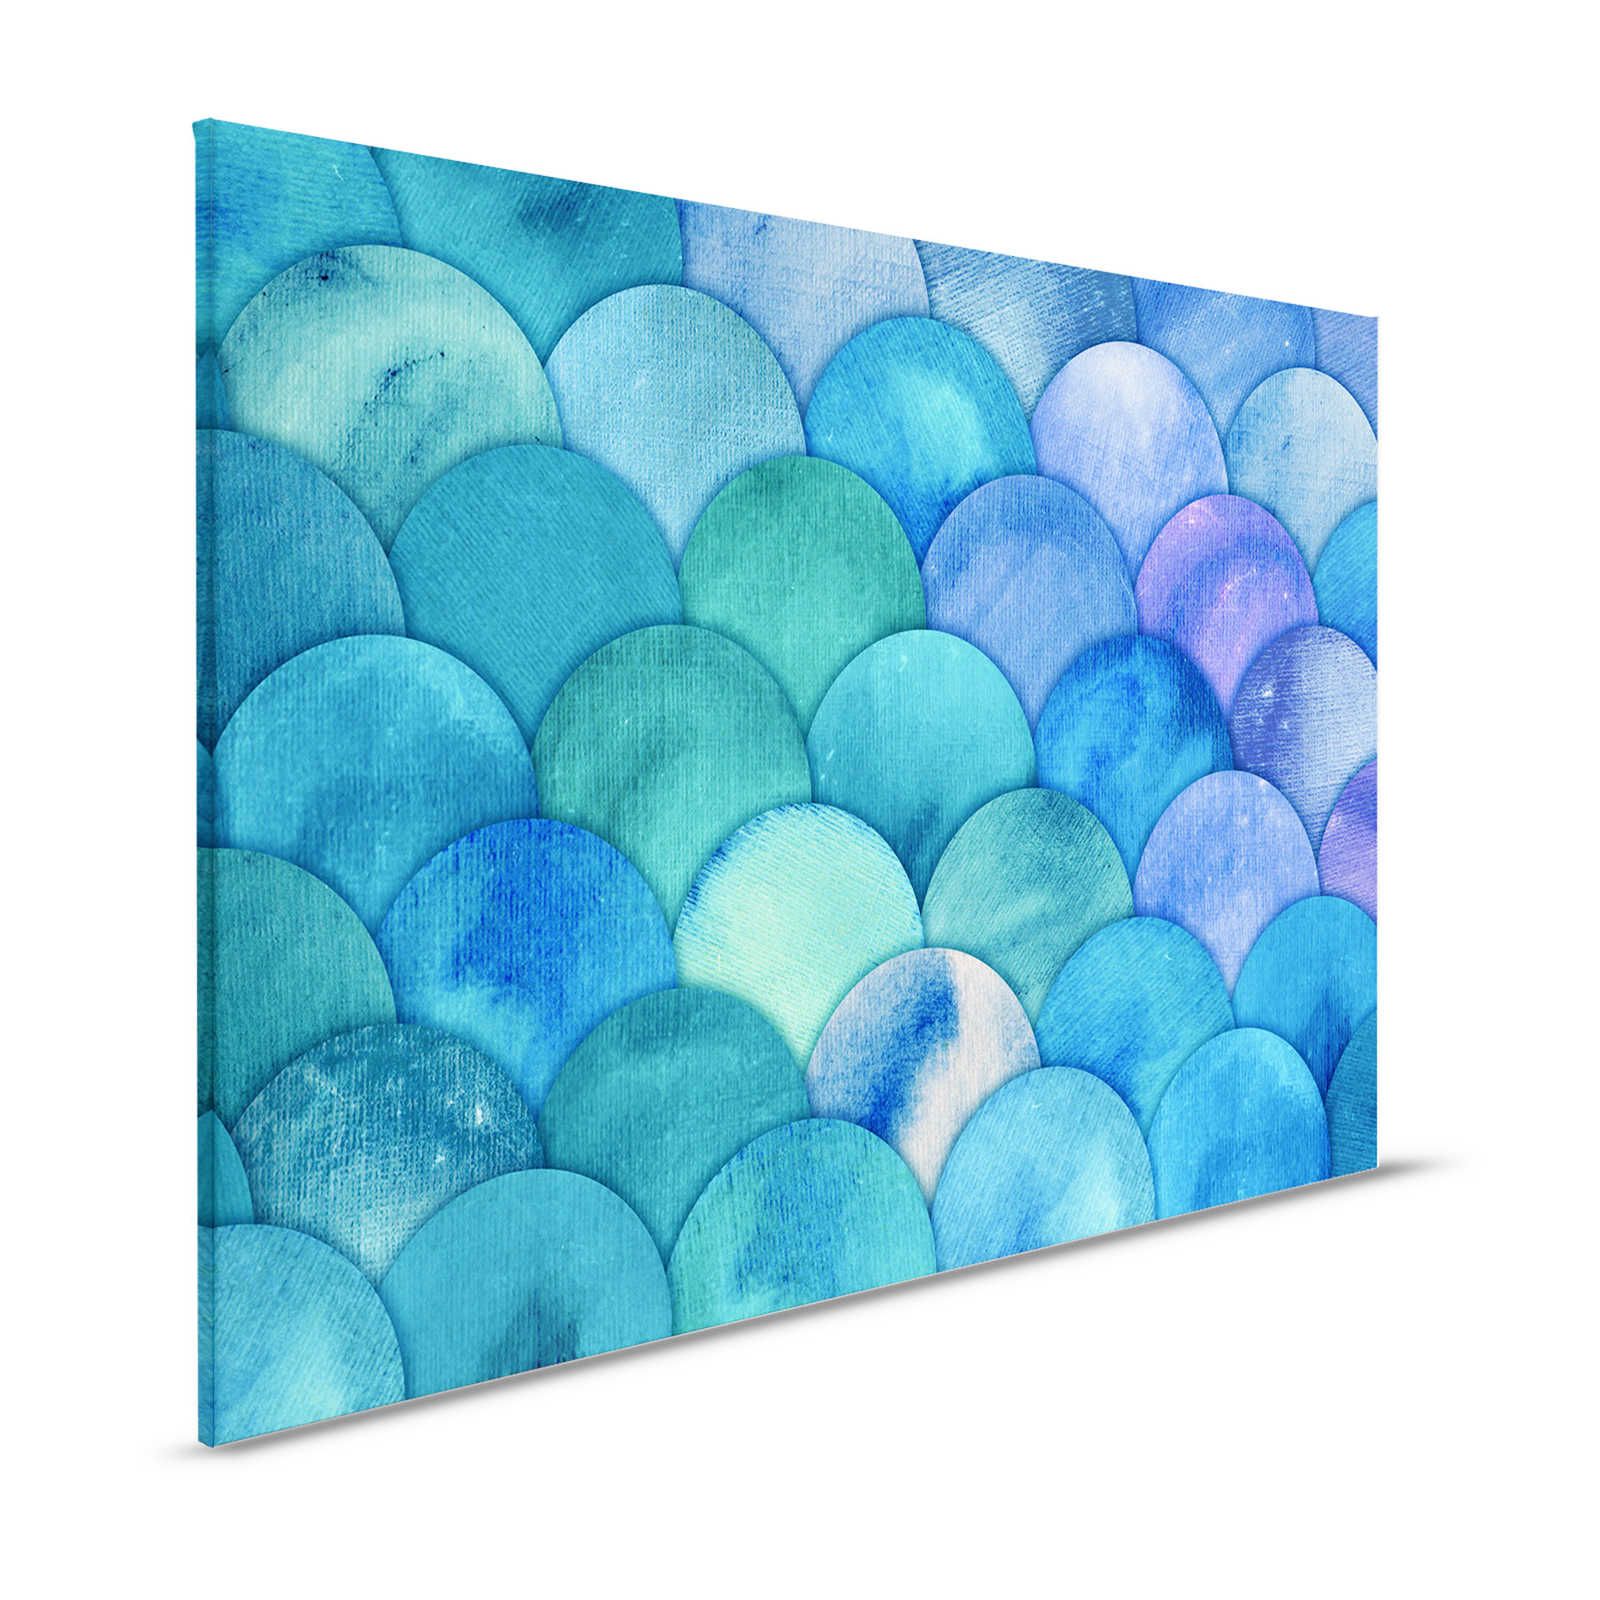 Canvas with fish scale pattern - 120 cm x 80 cm
